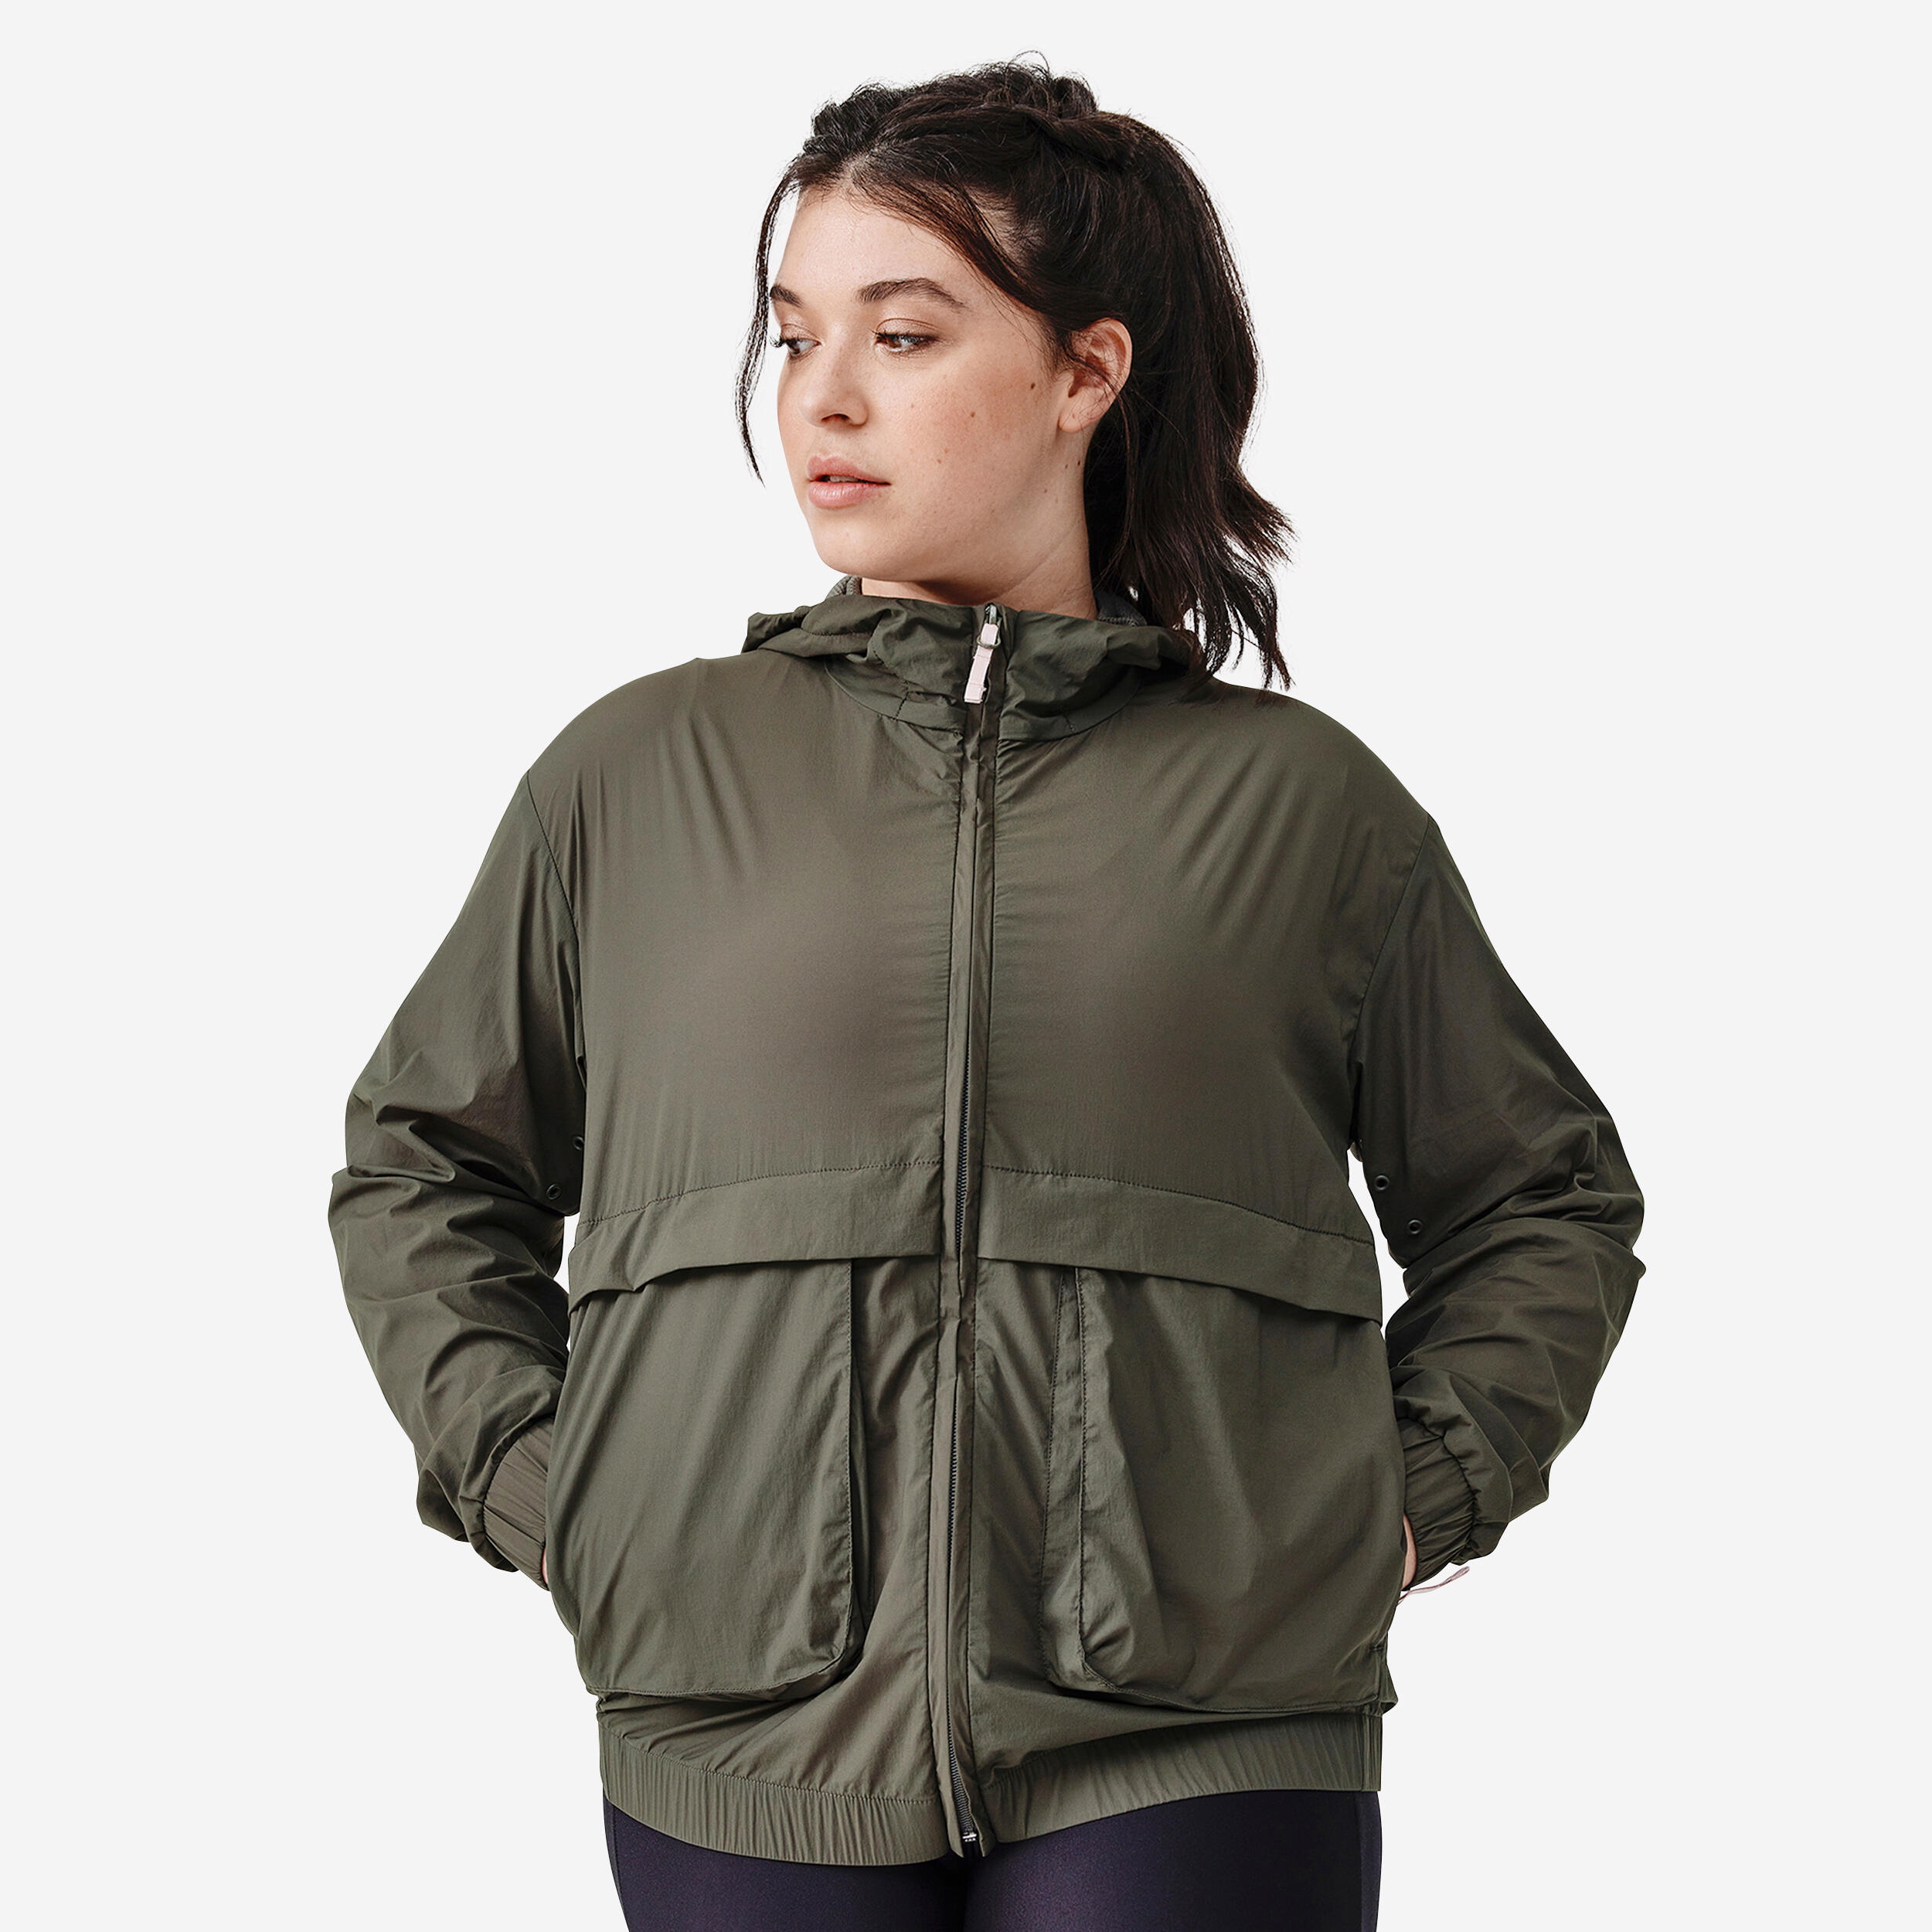 Paramo Women's Alize Windproof Jacket. Lightwieght Outer layer.